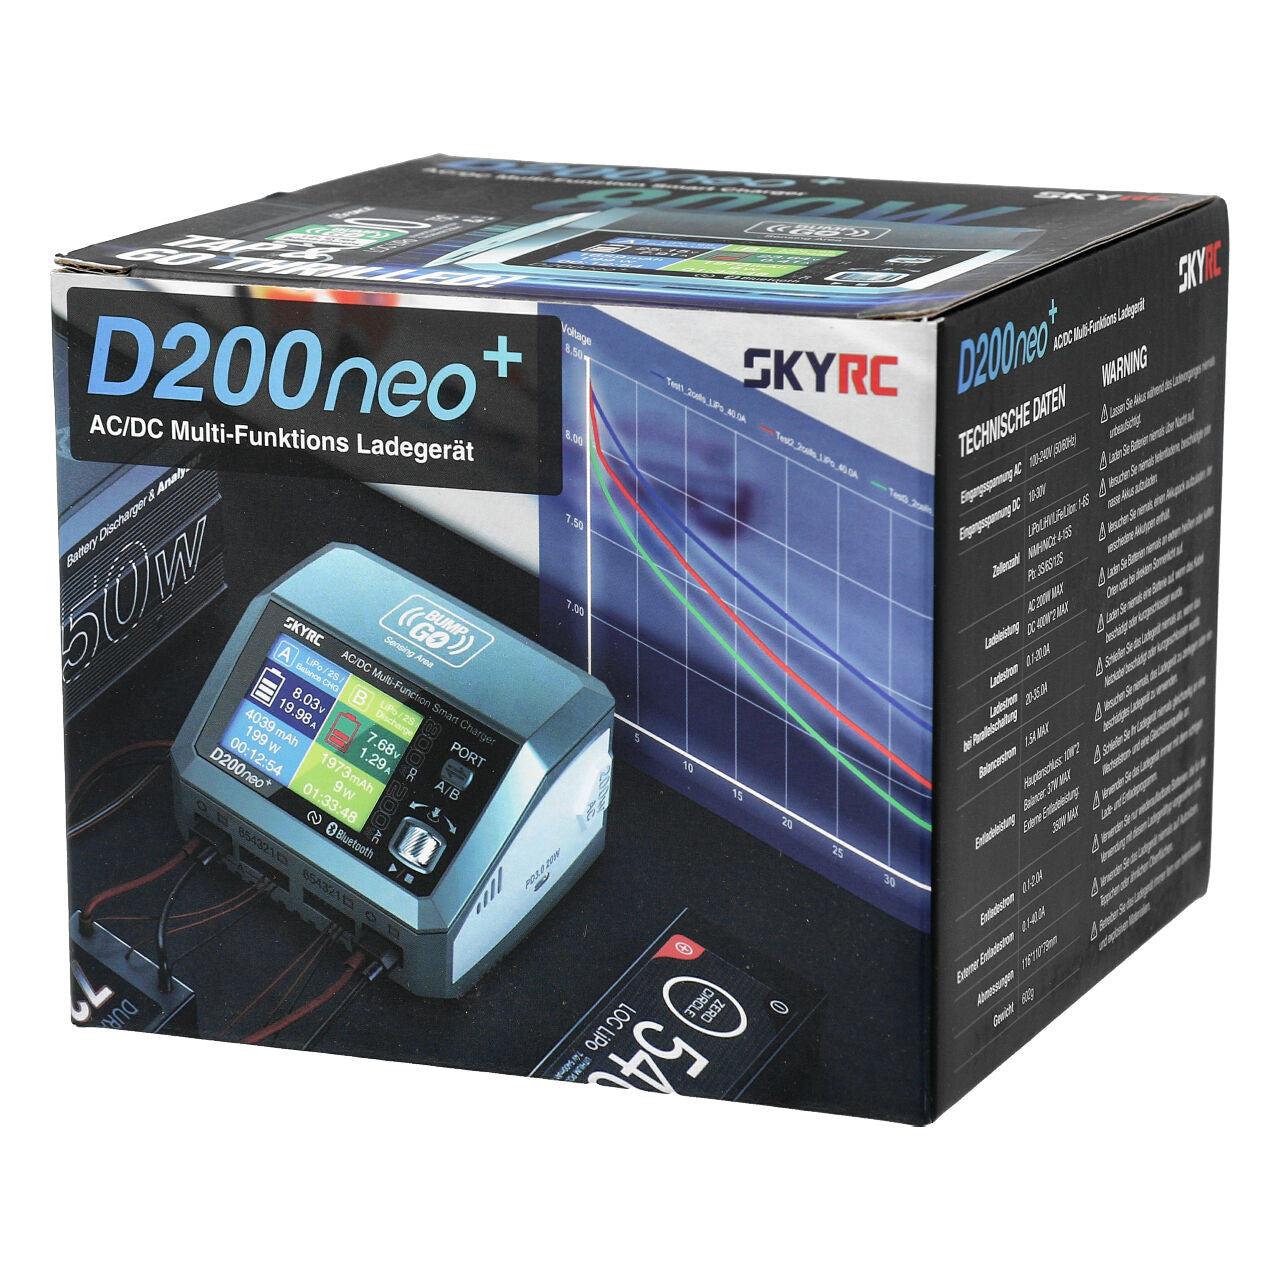 SkyRc Chargeur D200 Neo+ Duo 1-6S 200W AC/DC SK100196-06